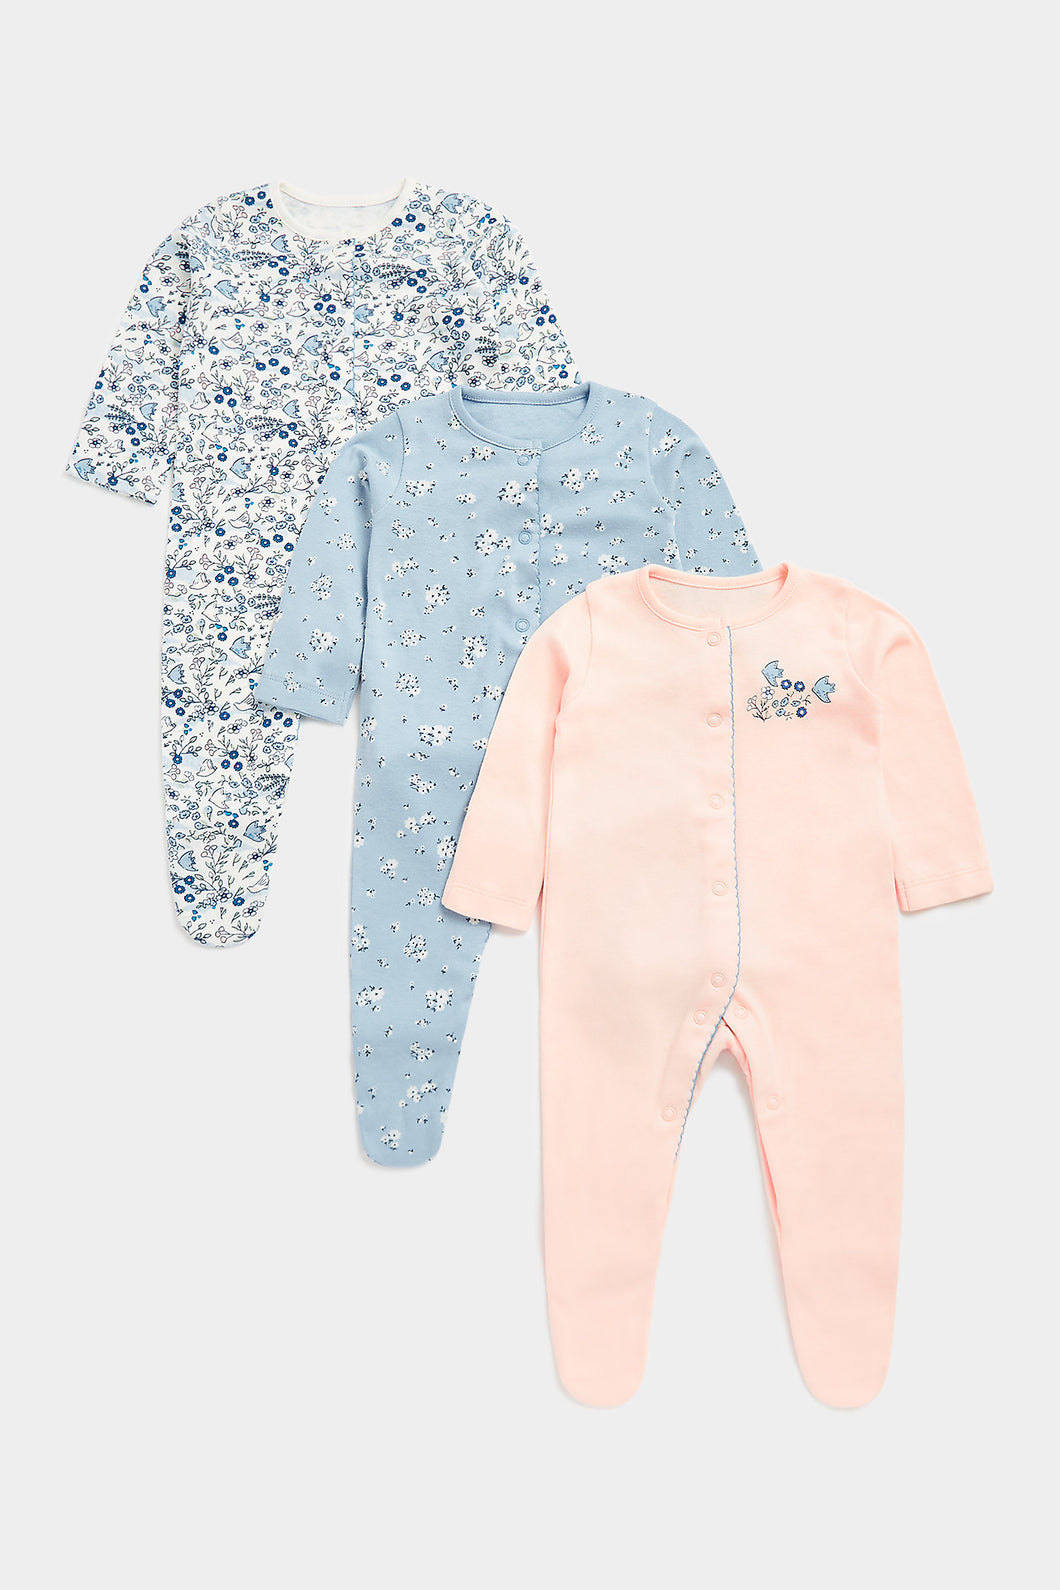 Mothercare Bluebird Sleepsuits - 3 Pack